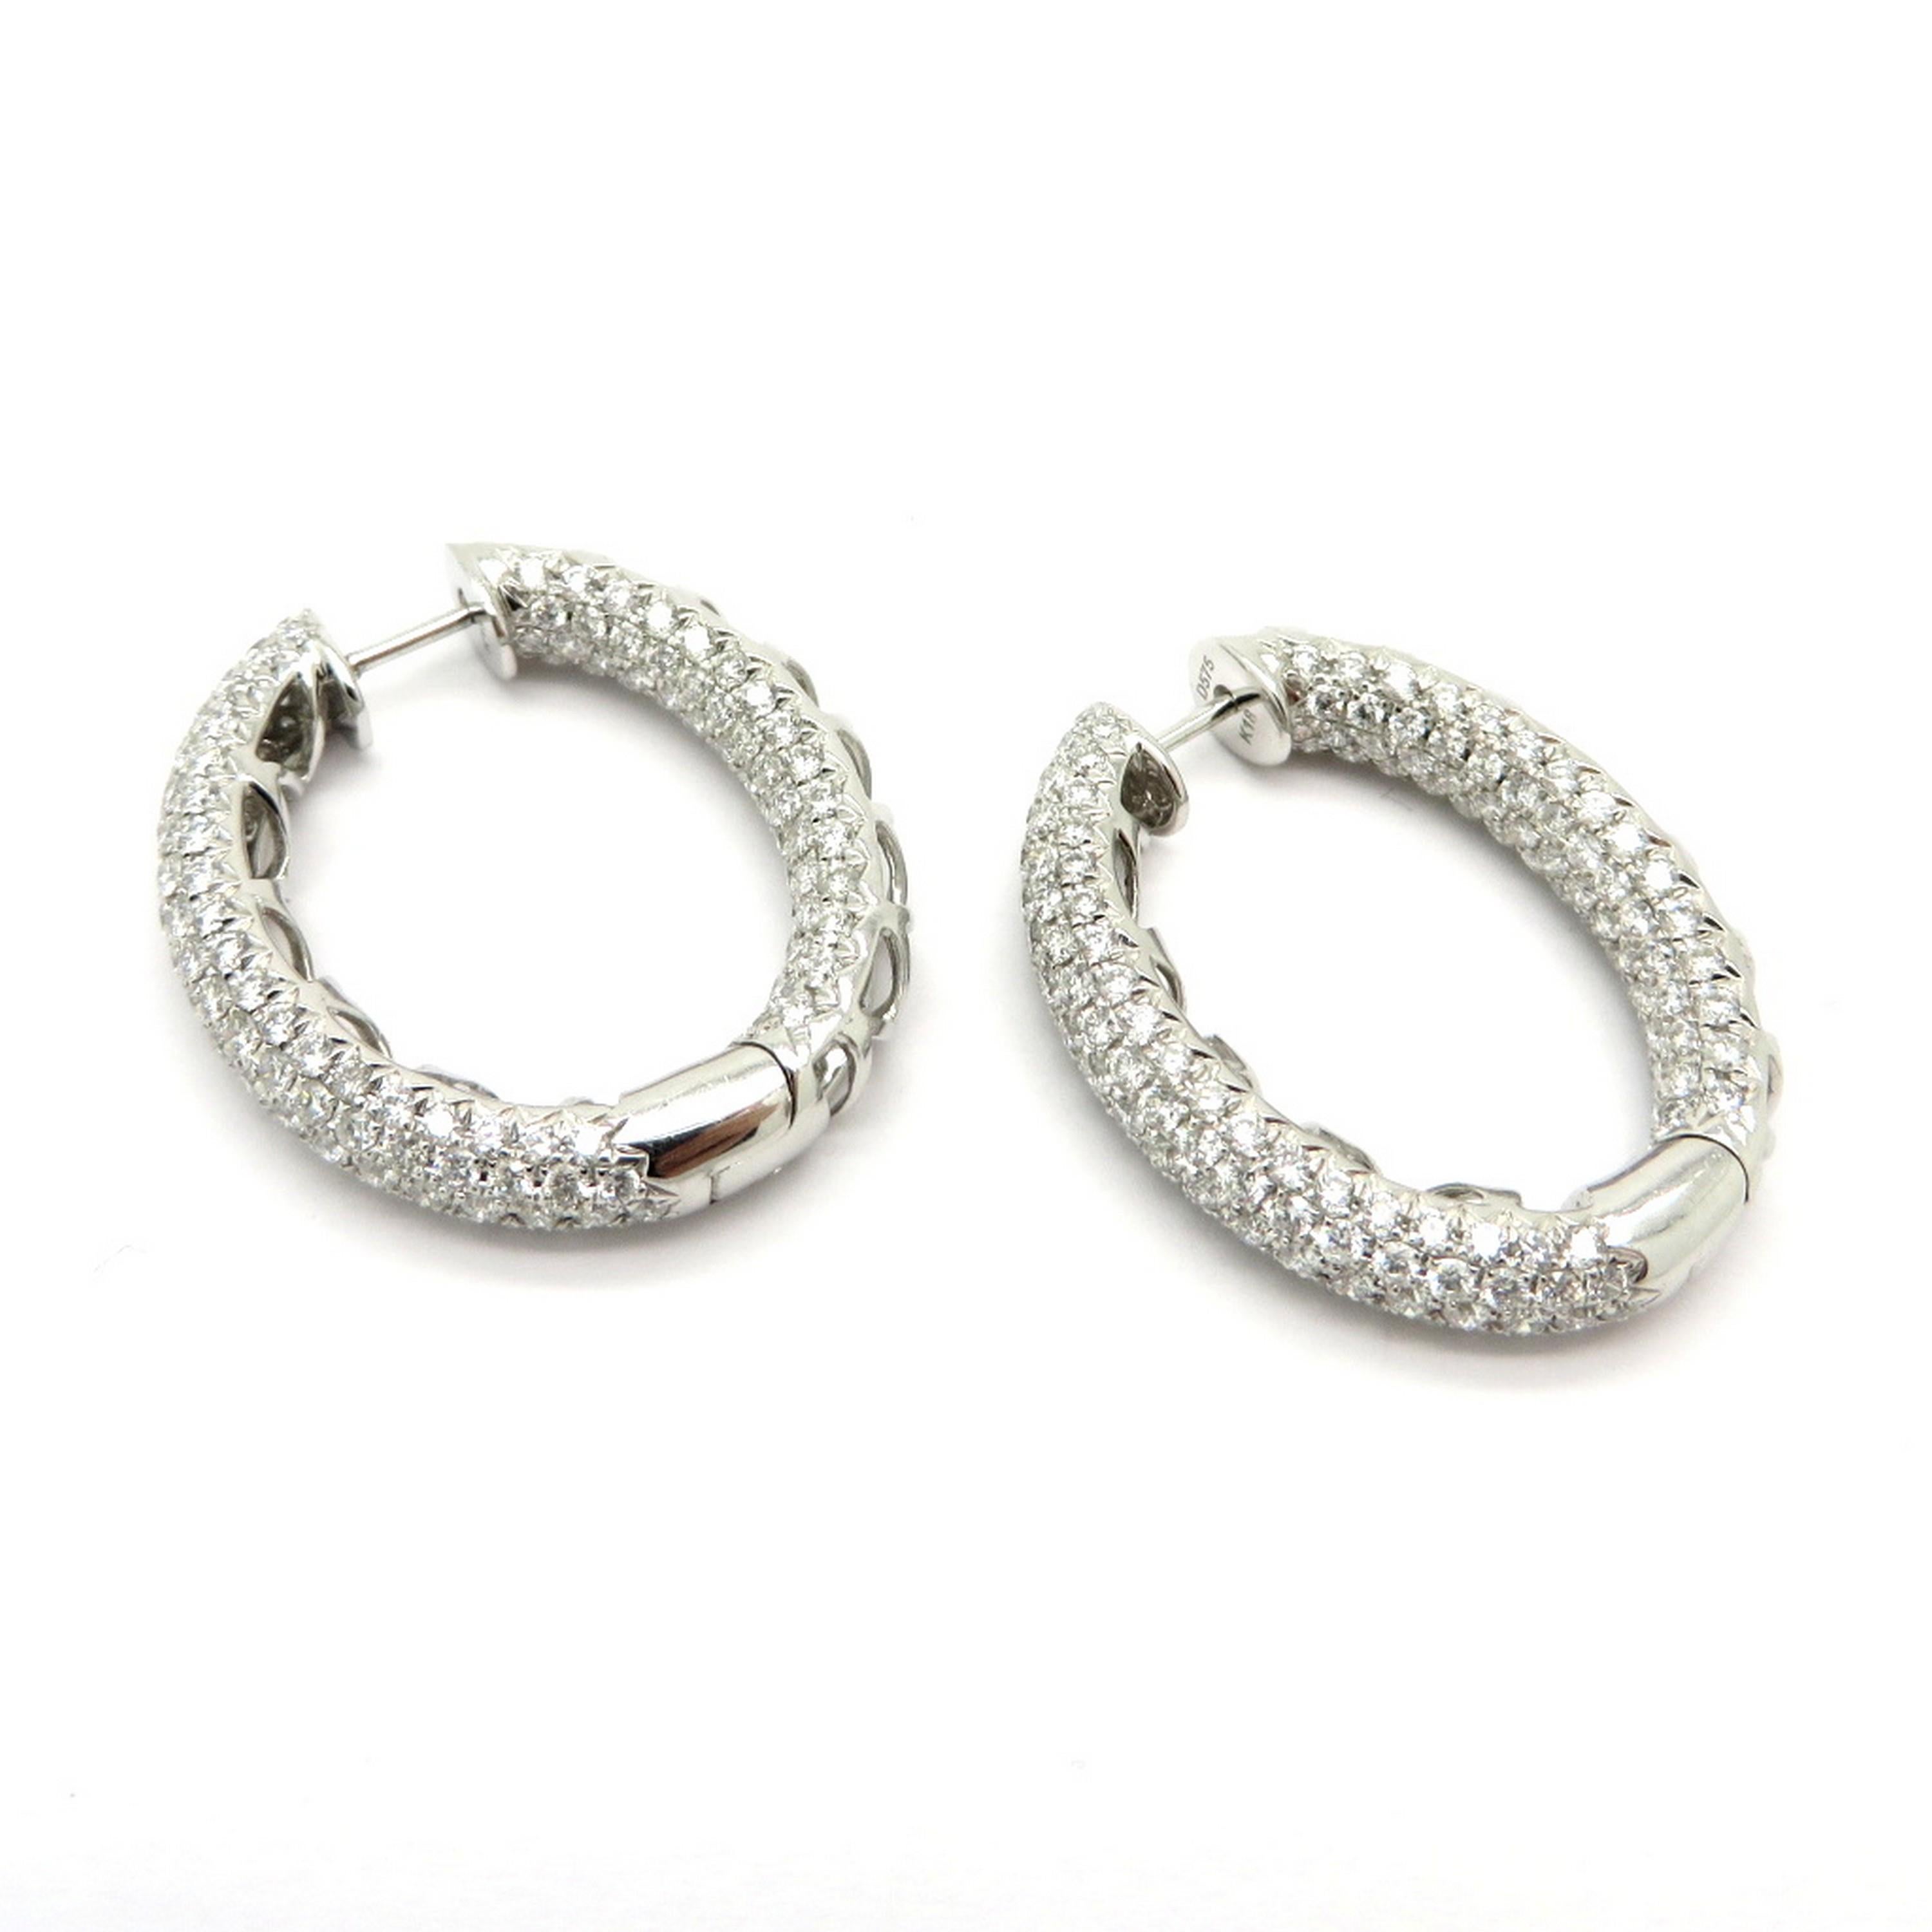 Estate 18K white gold pave oval diamond hoop earrings. Showcasing 346 round brilliant cut pave set diamonds weighing a combined total of approximately 5.75 carats. Diamond grading: color grade: G – H. Clarity grade: VS2 – SI1. The earrings are